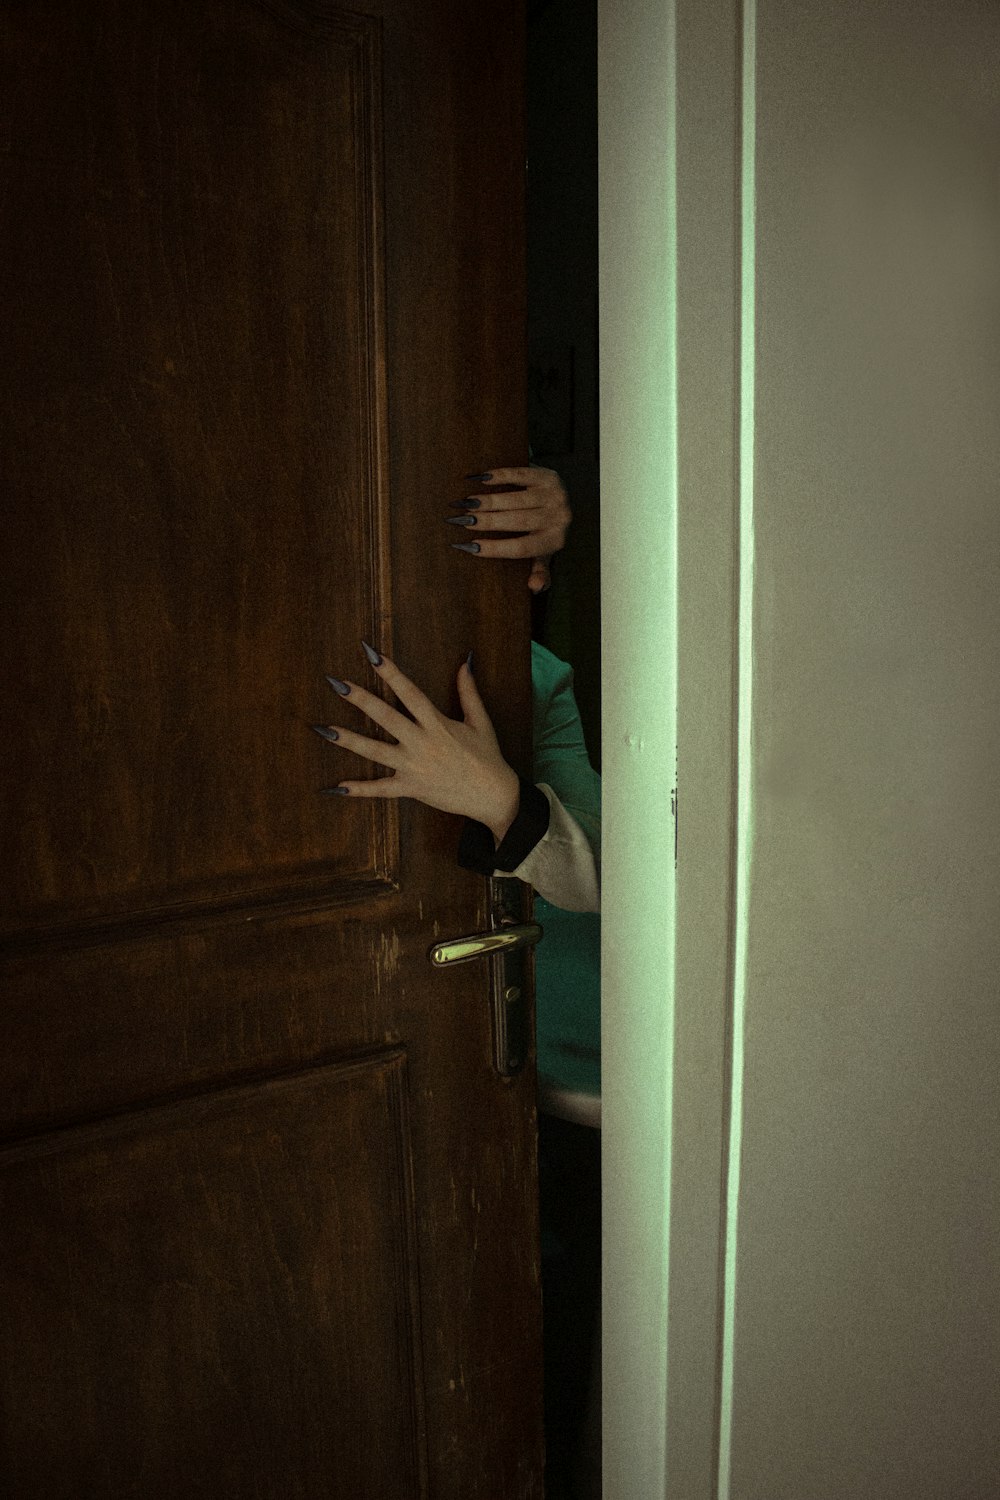 a person reaching out from behind a door